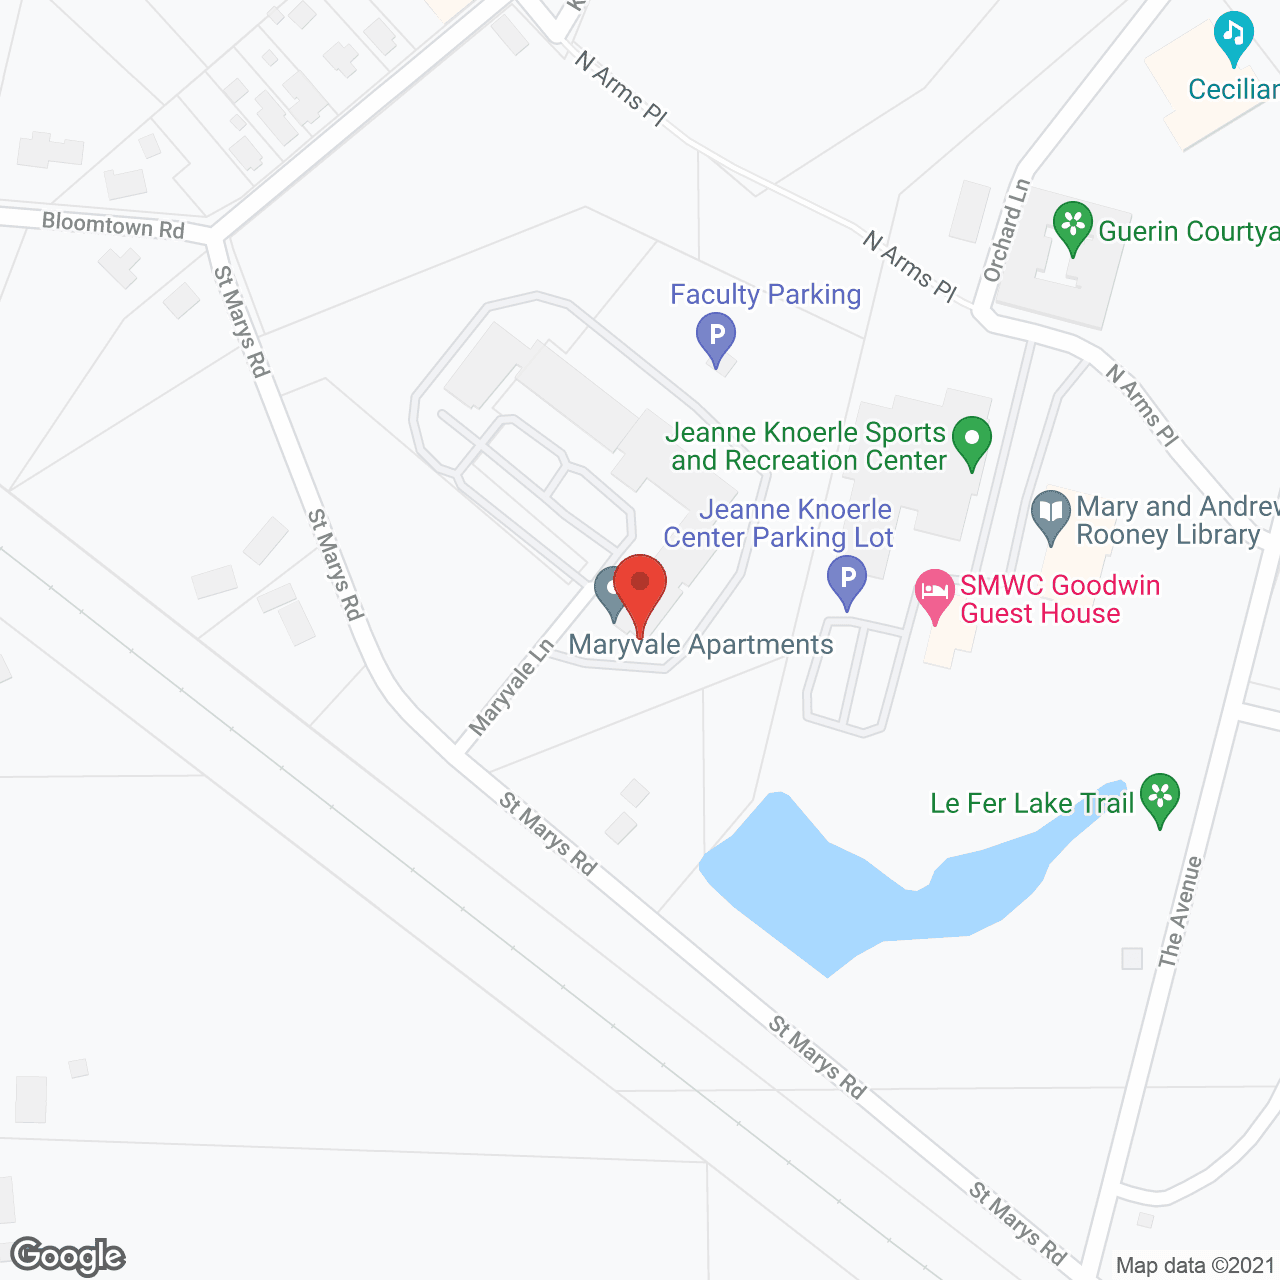 Maryvale Apartments in google map